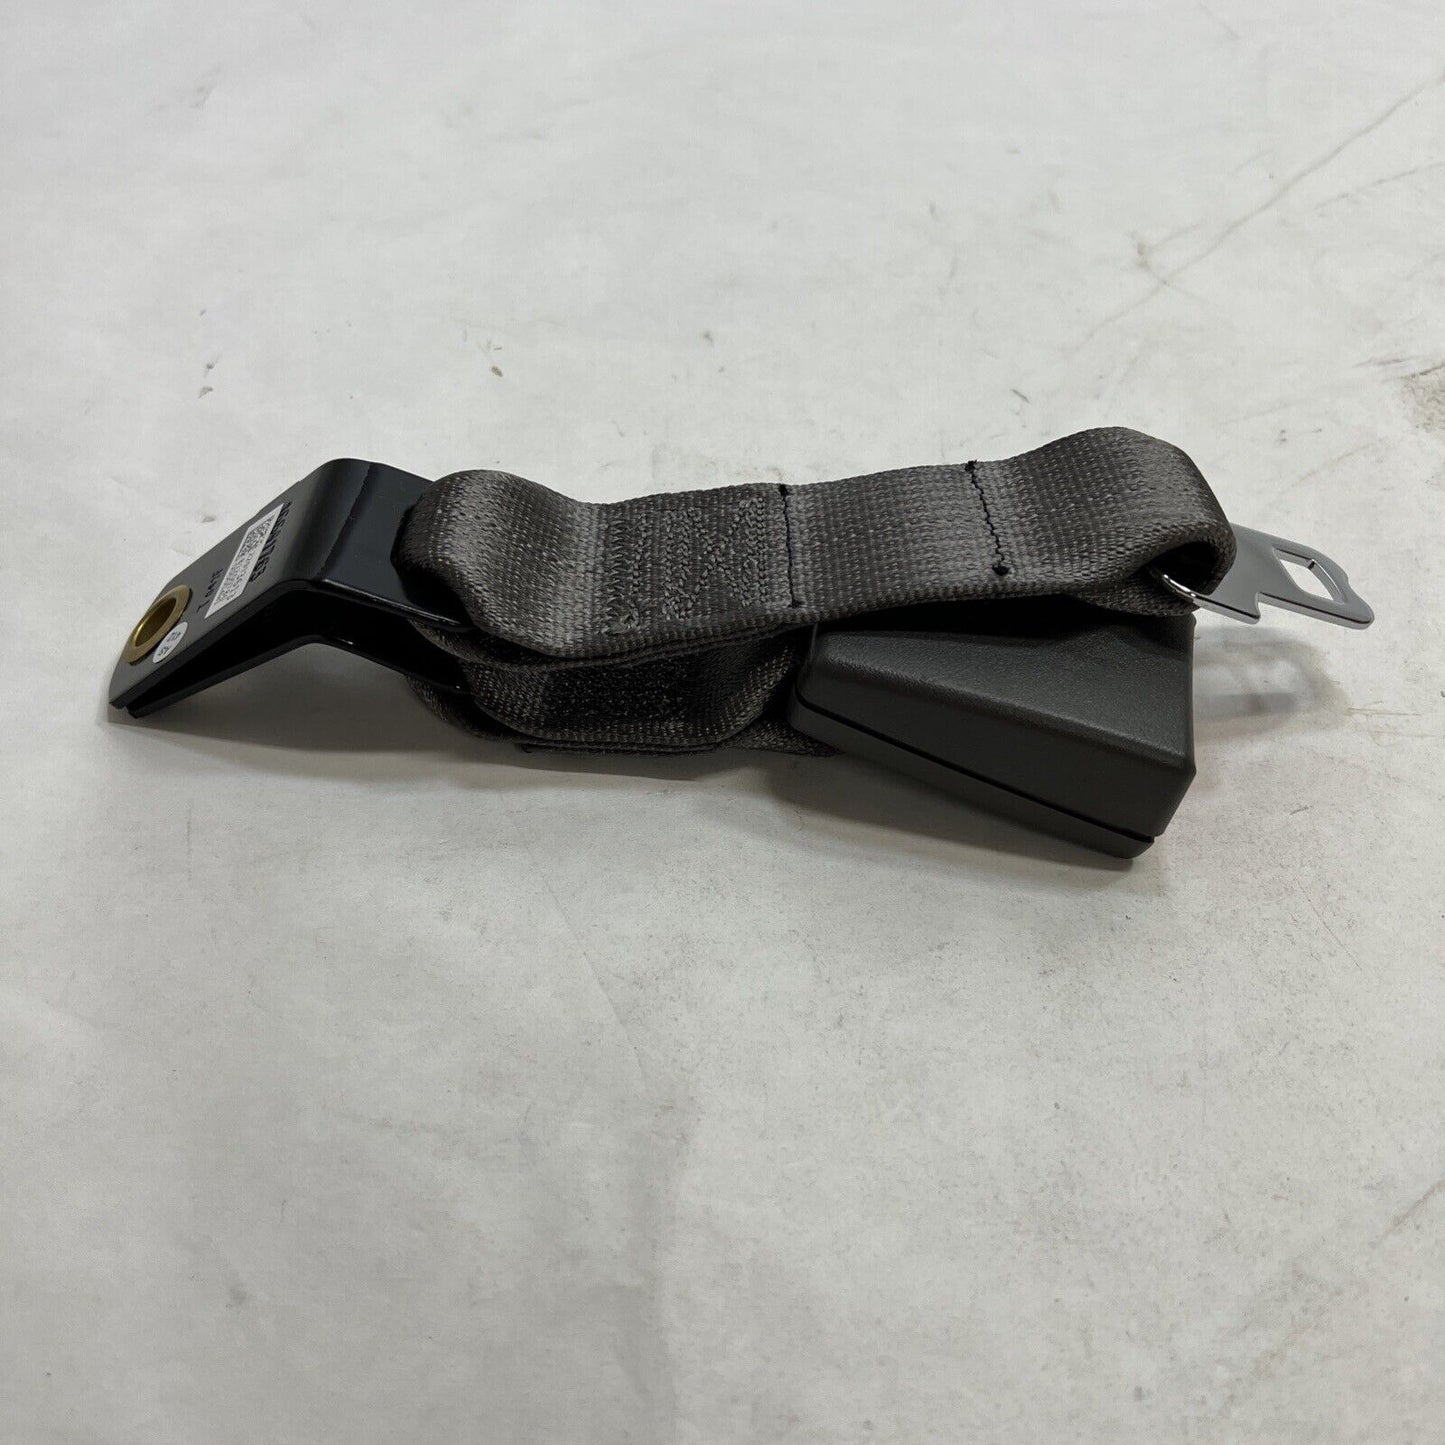 New OEM GM Chevy Express 2500 3500 Seat Belt with Buckle Rear 2011-2020 19300349